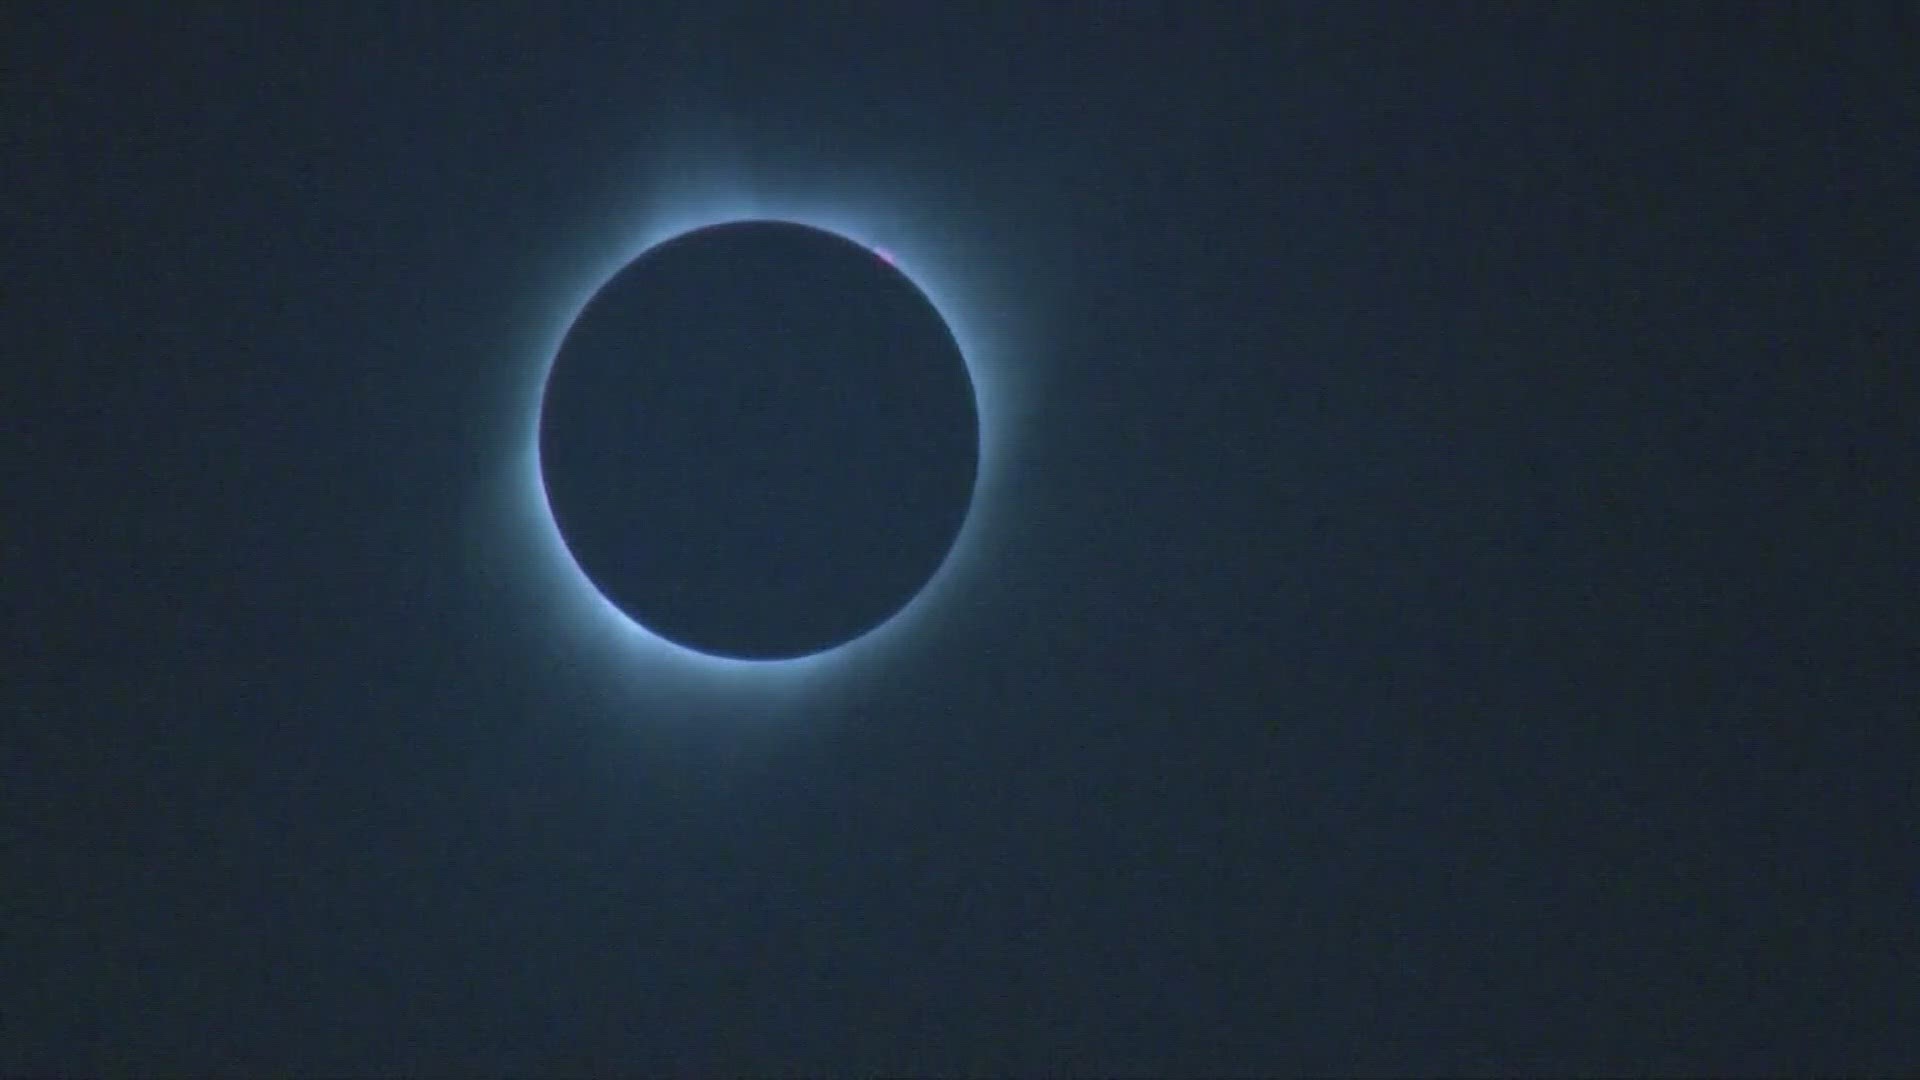 The City of Waco expects thousands to come to Central Texas to see the total solar eclipse.